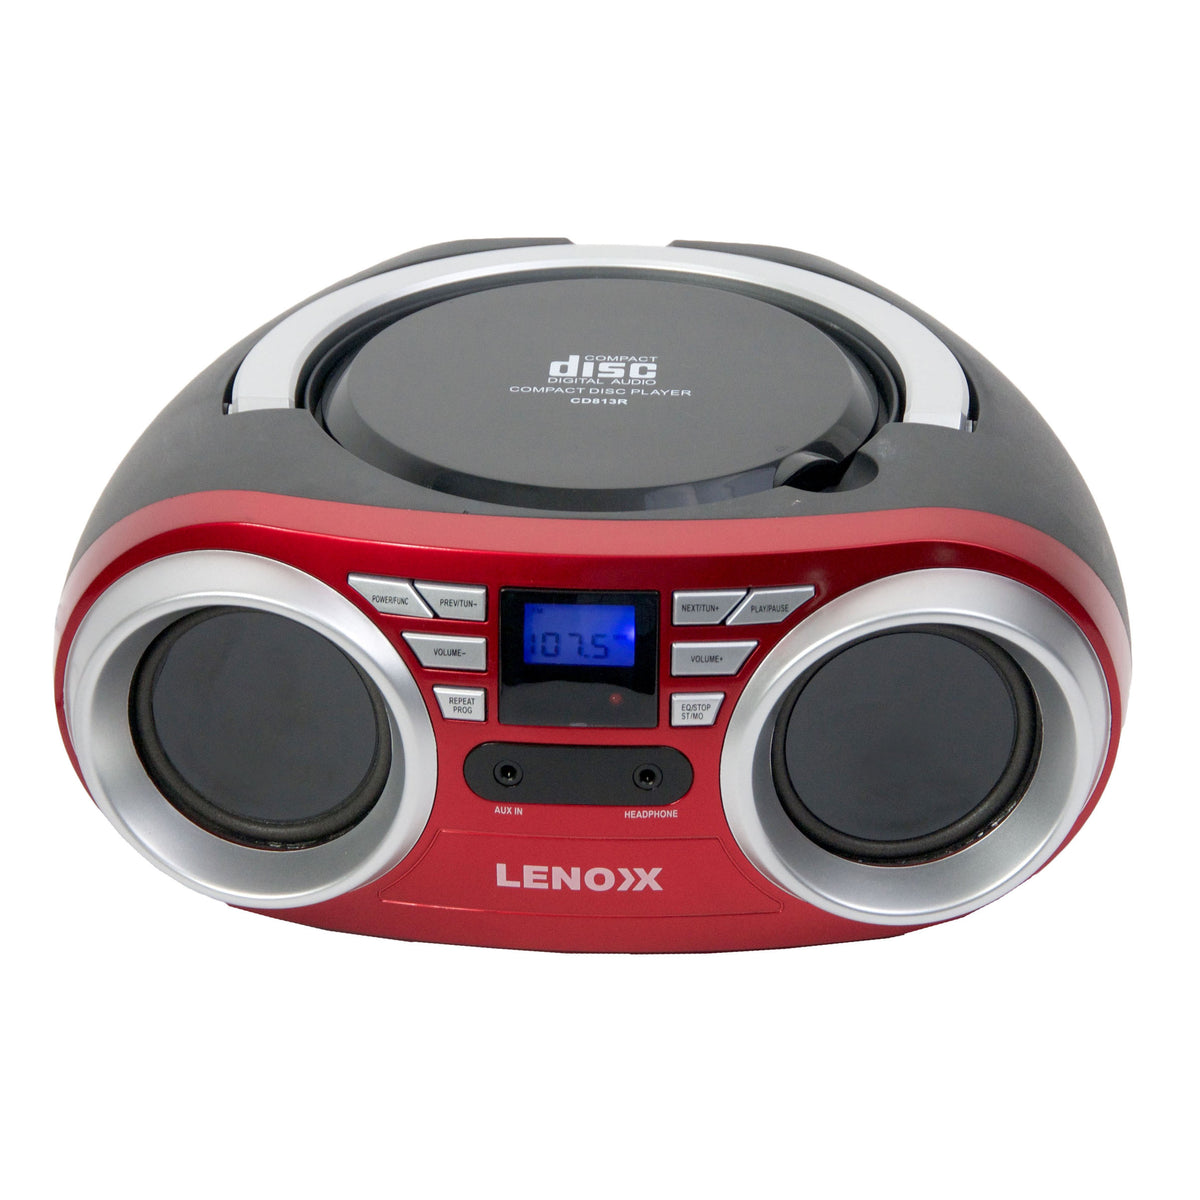 Red portable CD Player with AM/FM Radio.